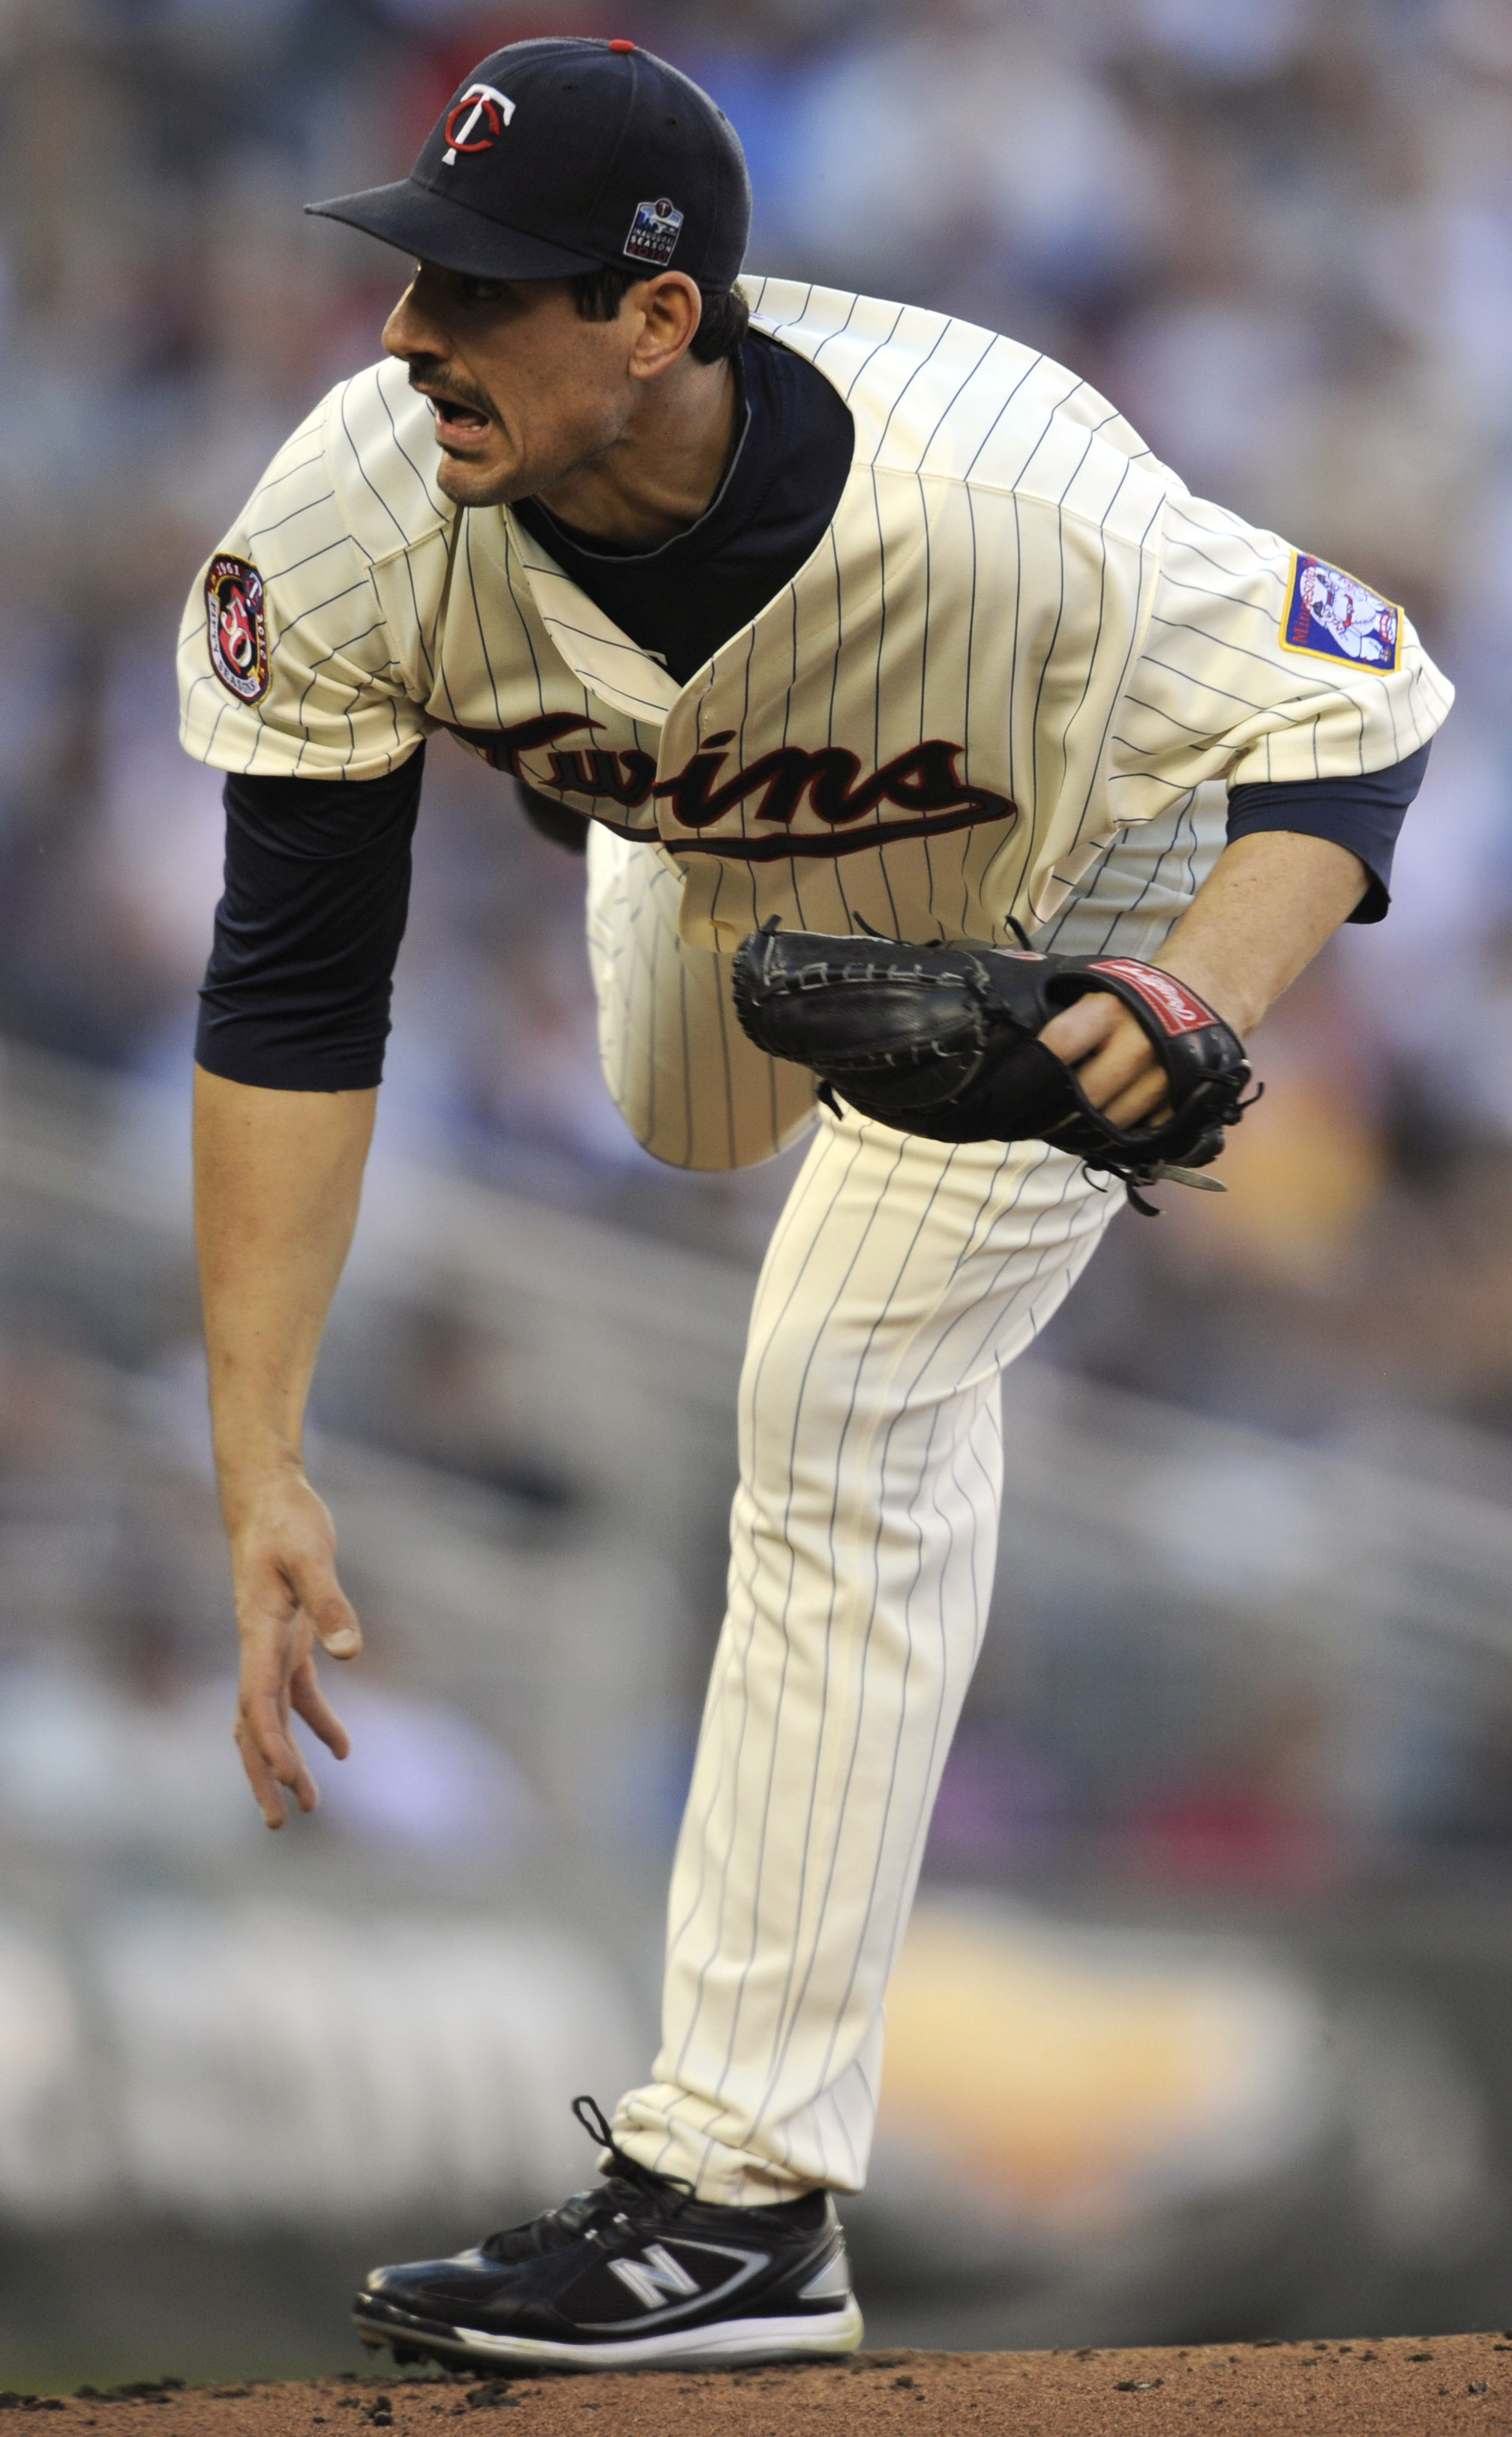 MINNEAPOLIS, MN - OCTOBER 7: Carl Pavano #48 of the Minnesota Twins pitches during game two of the ALDS game against the New York Yankees on October 7, 2010 at Target Field in Minneapolis, Minnesota.  (Photo by Hannah Foslien/Getty Images)